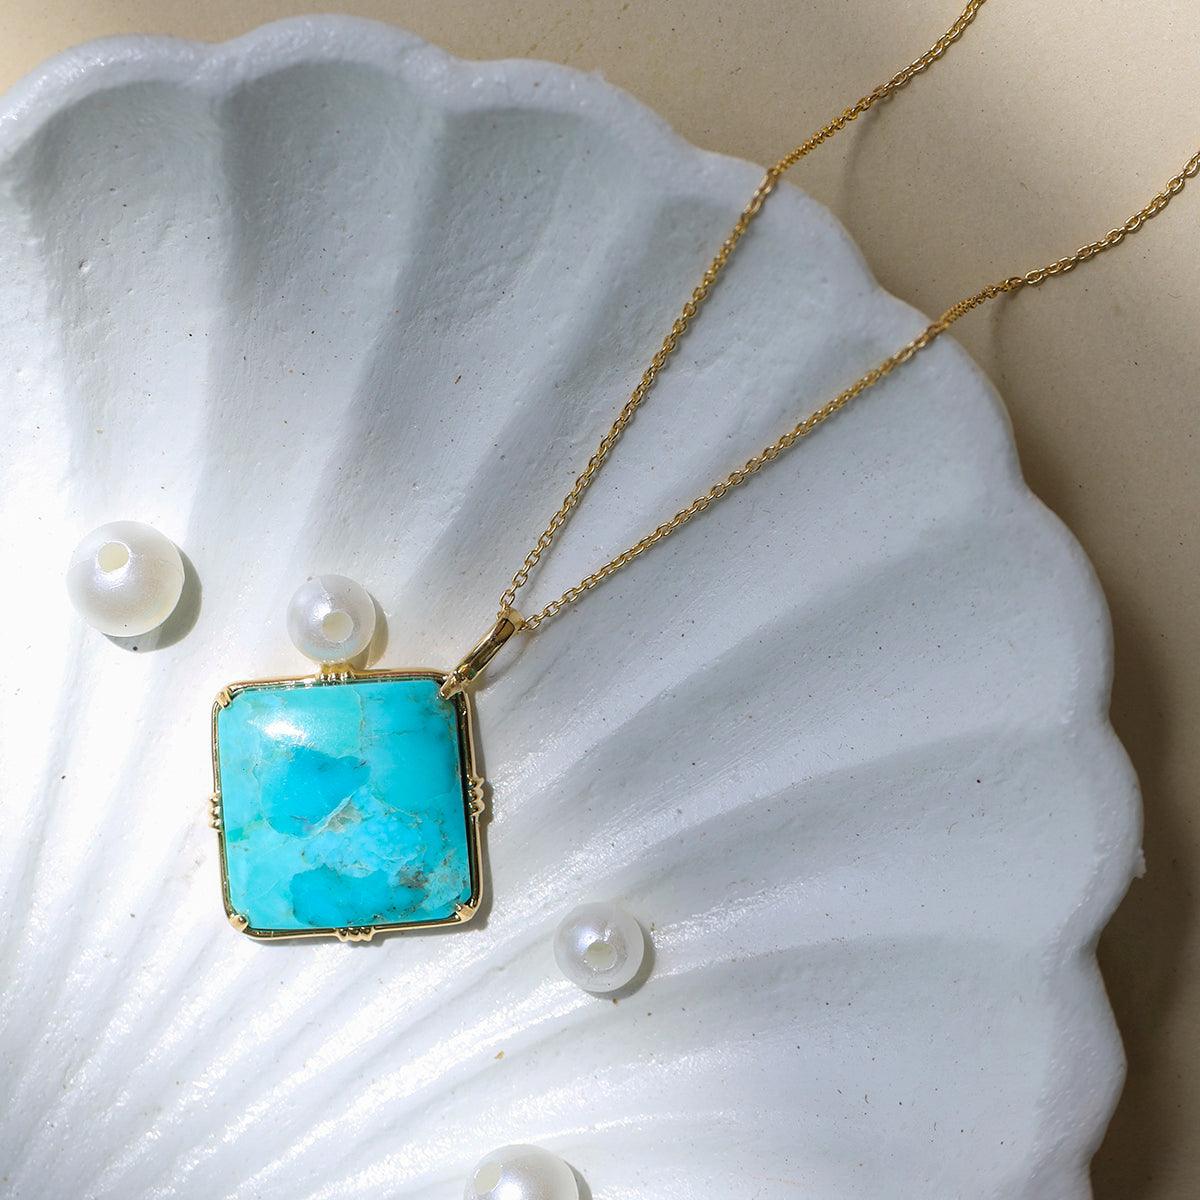 Blue Mohave Turquoise Necklace 14kt Gold Over 925 Silver Chain Pendant Necklace - YoTreasure